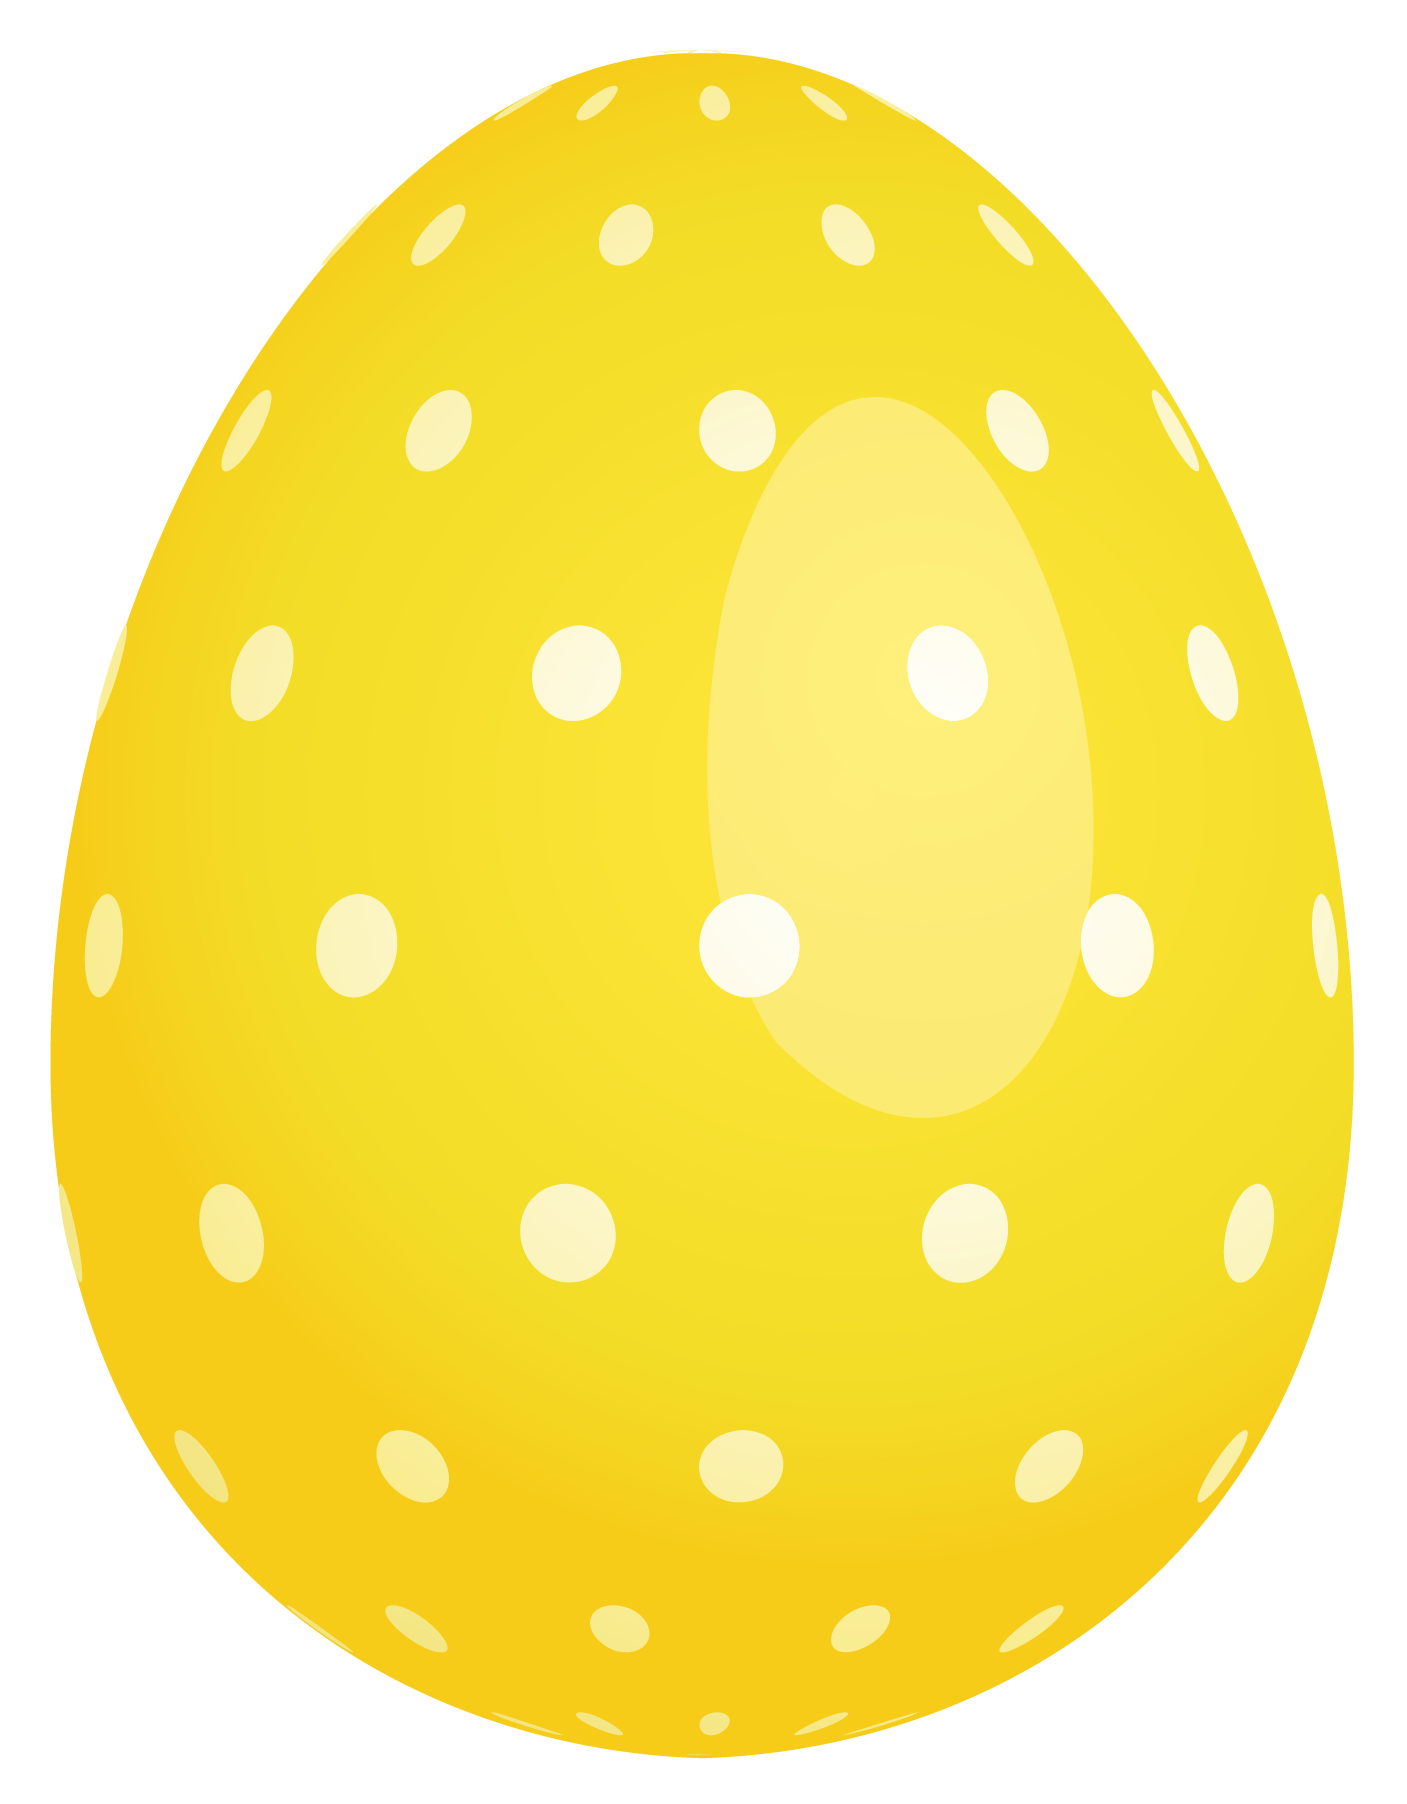 Yellow Dotted Easter Egg PNG Clipart | Gallery Yopriceville - High ...